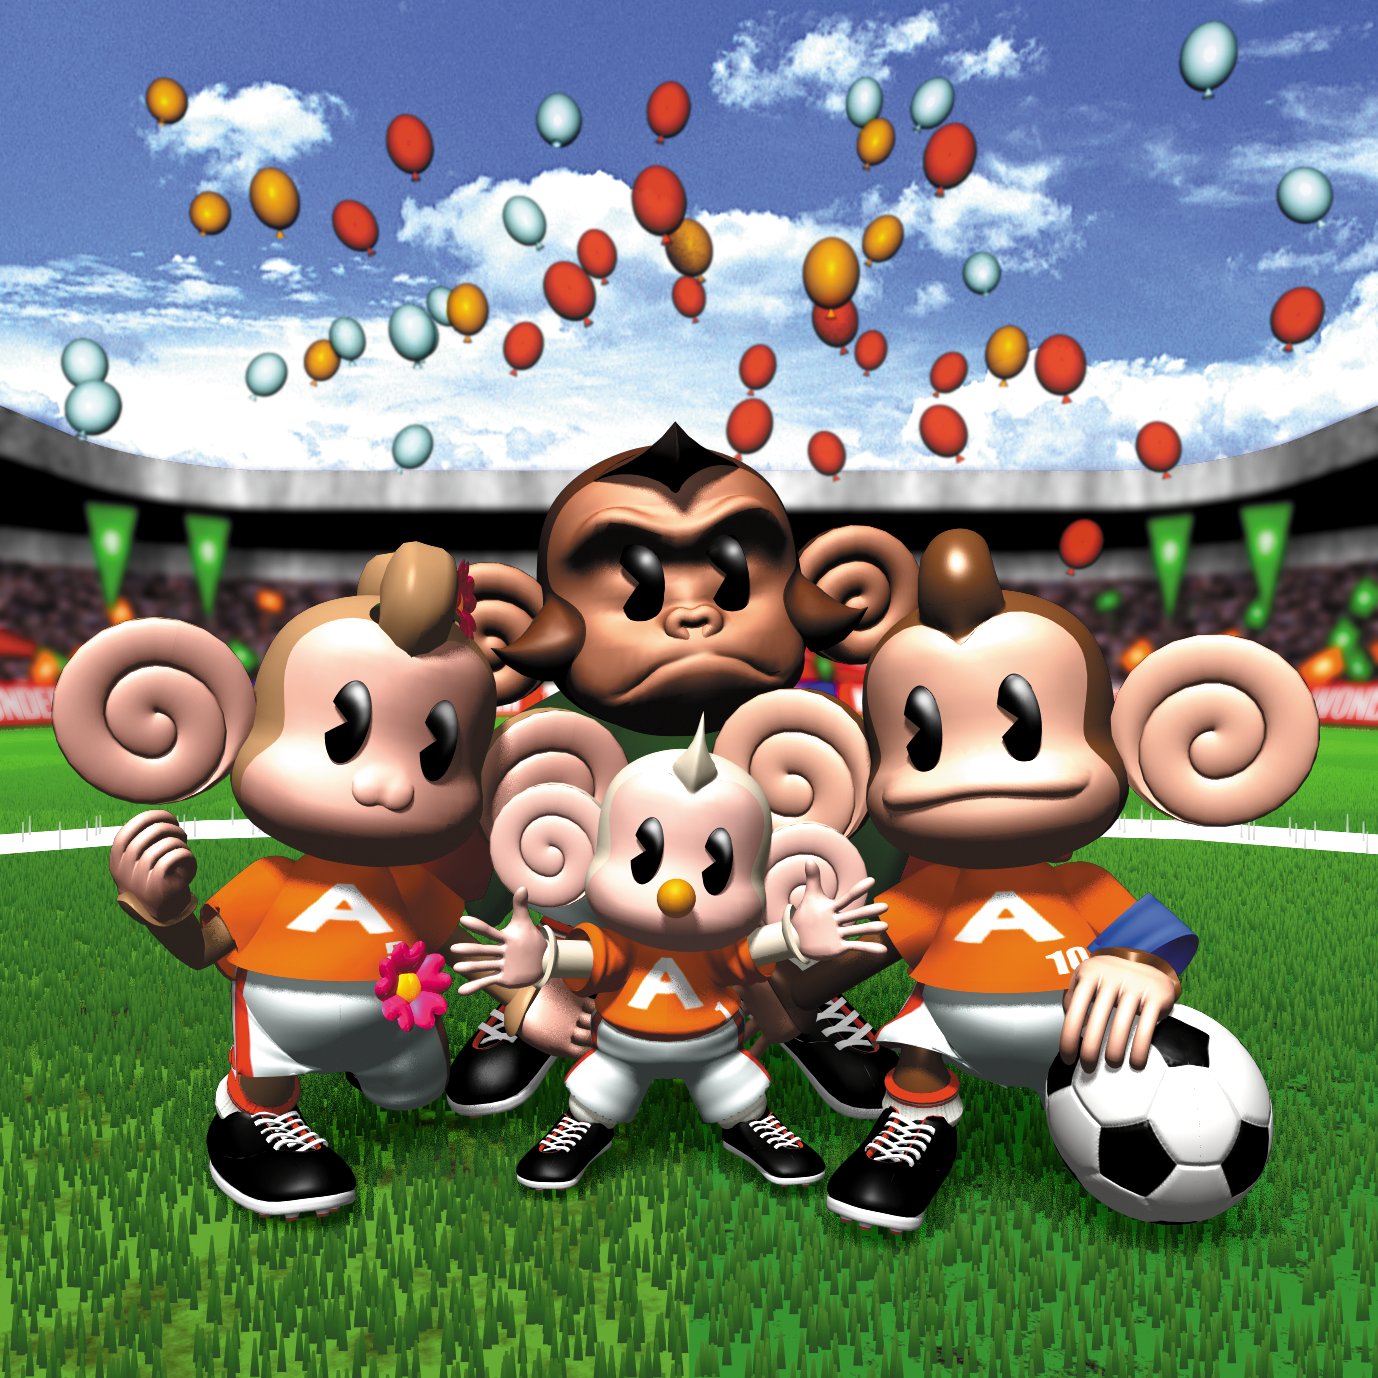 Super Monkey Ball Goooooaaaaaallll Monkey Soccer Debuted In 02 S Super Monkey Ball 2 Which Formation Did You Prefer Playing With Supermonkeyball Smbth T Co Lwxfbqkuhh